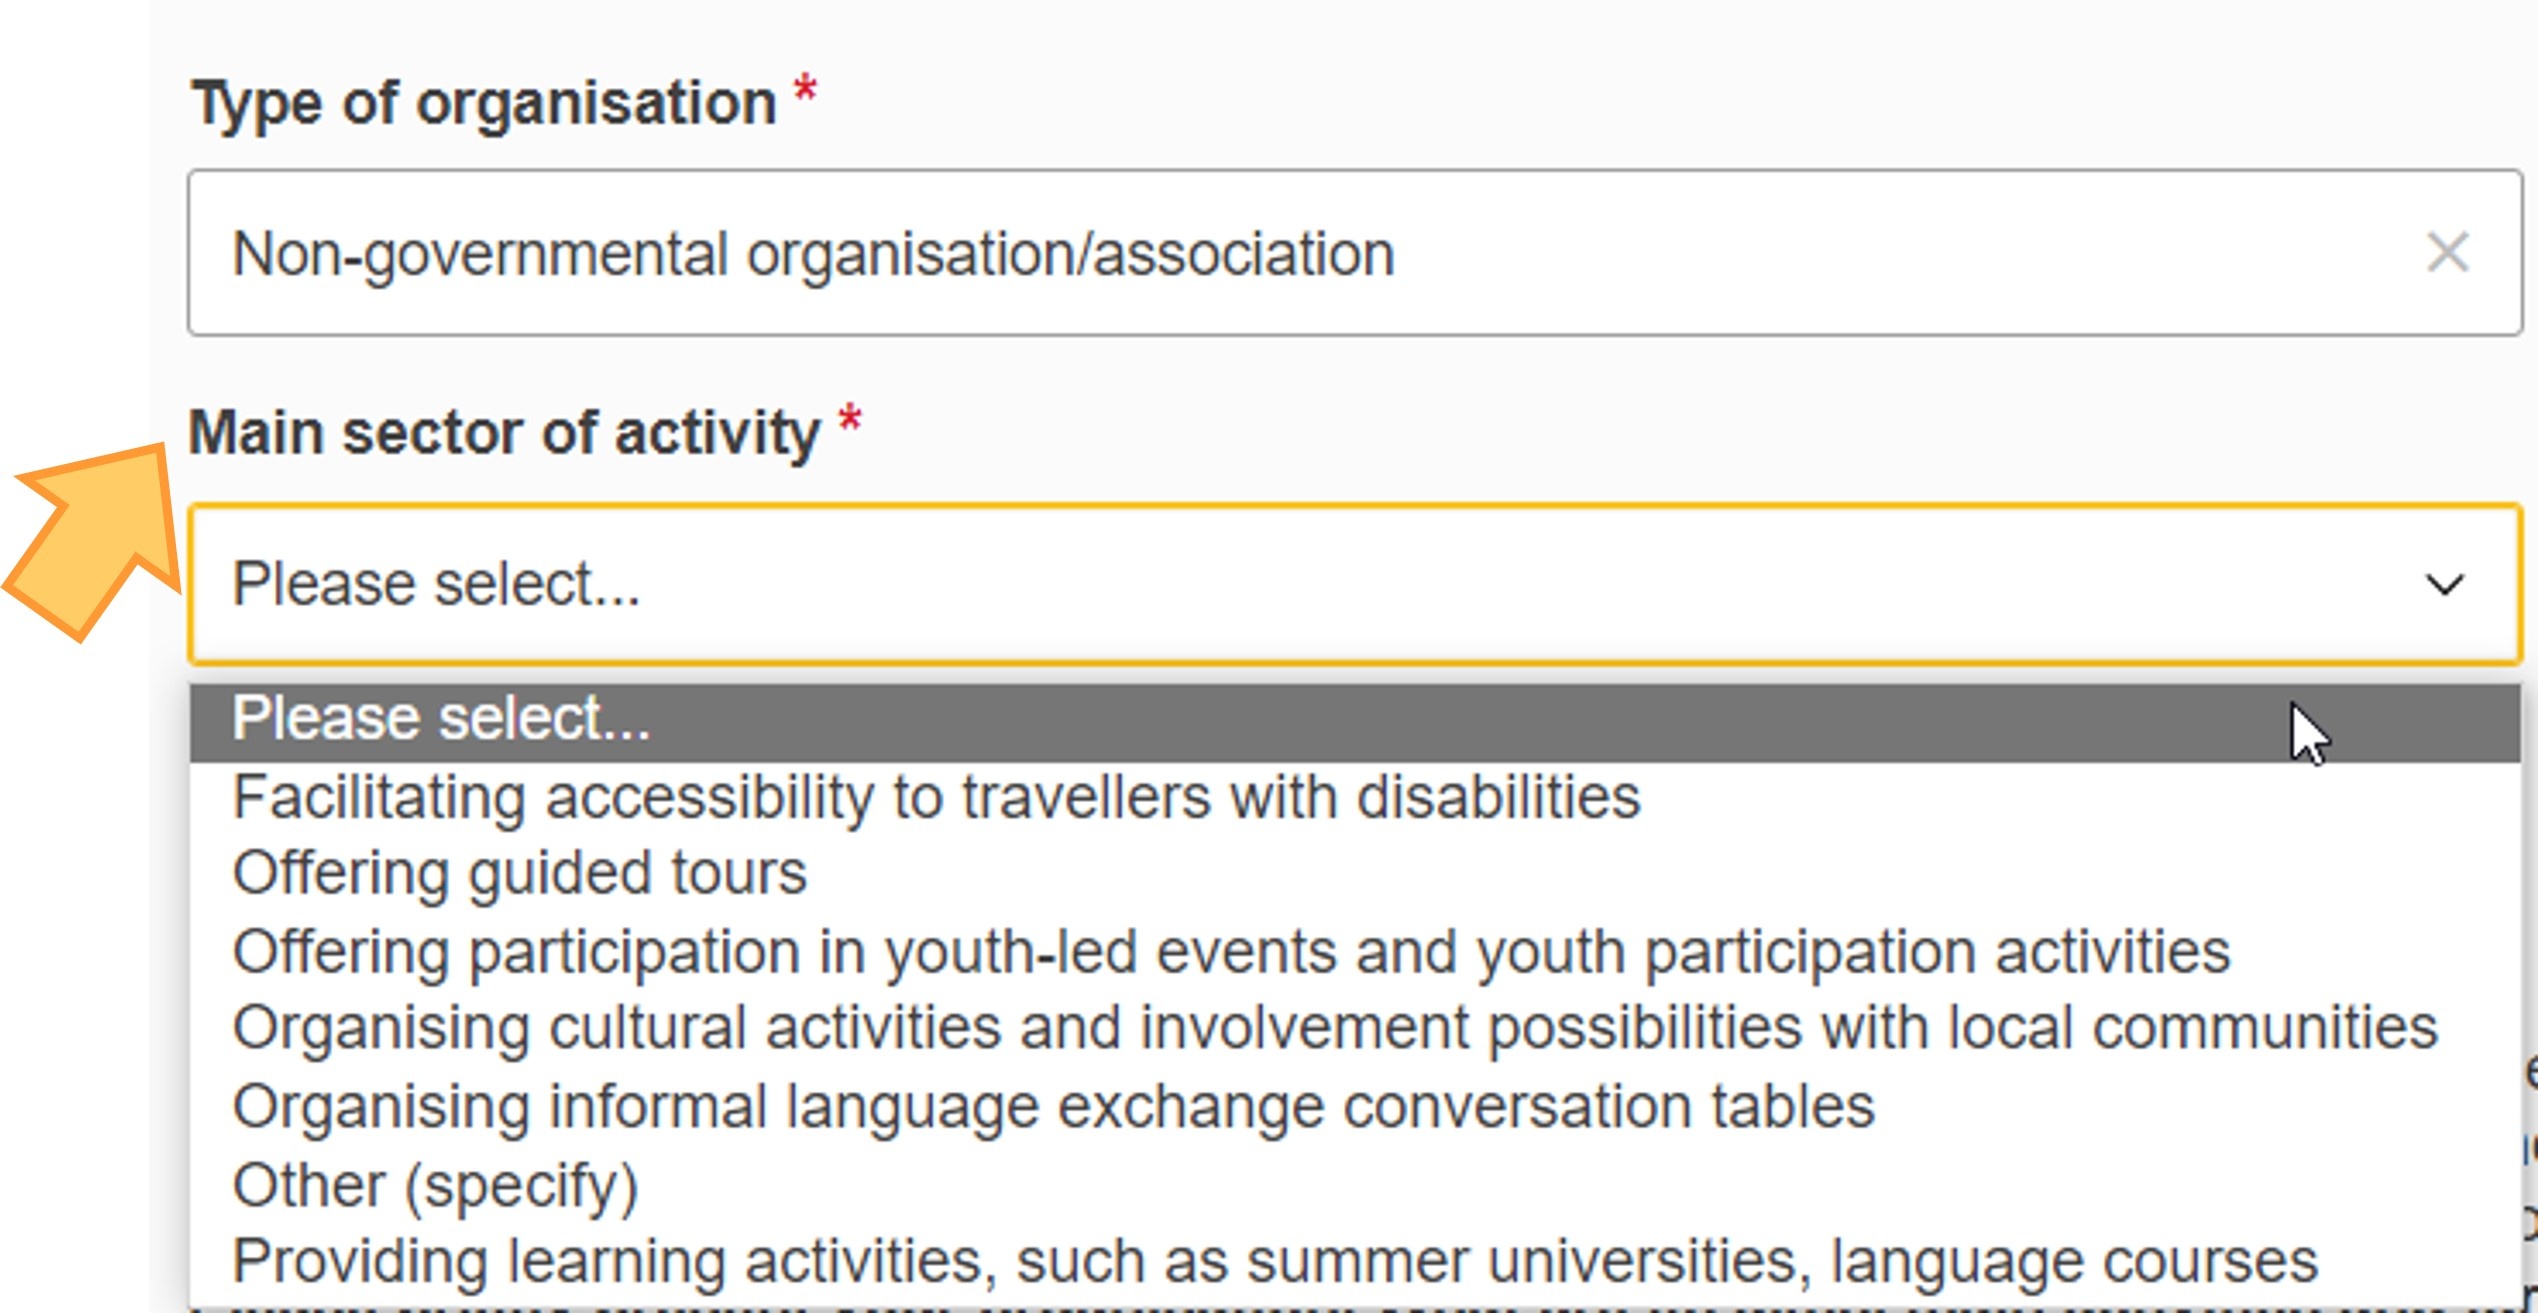 Select the Main sector of activity, if applicable